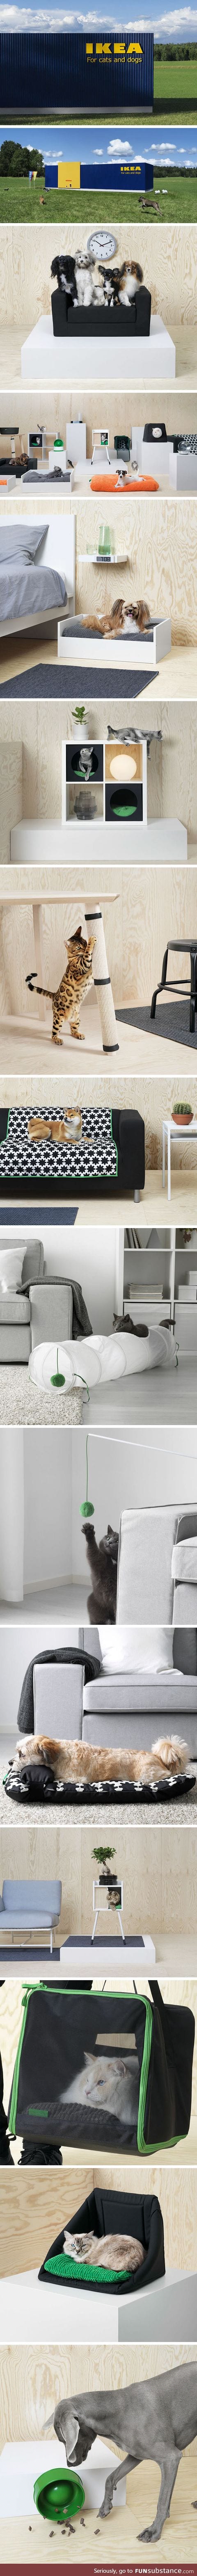 Ikea pet furniture collection just 'purrfect' for animal lovers